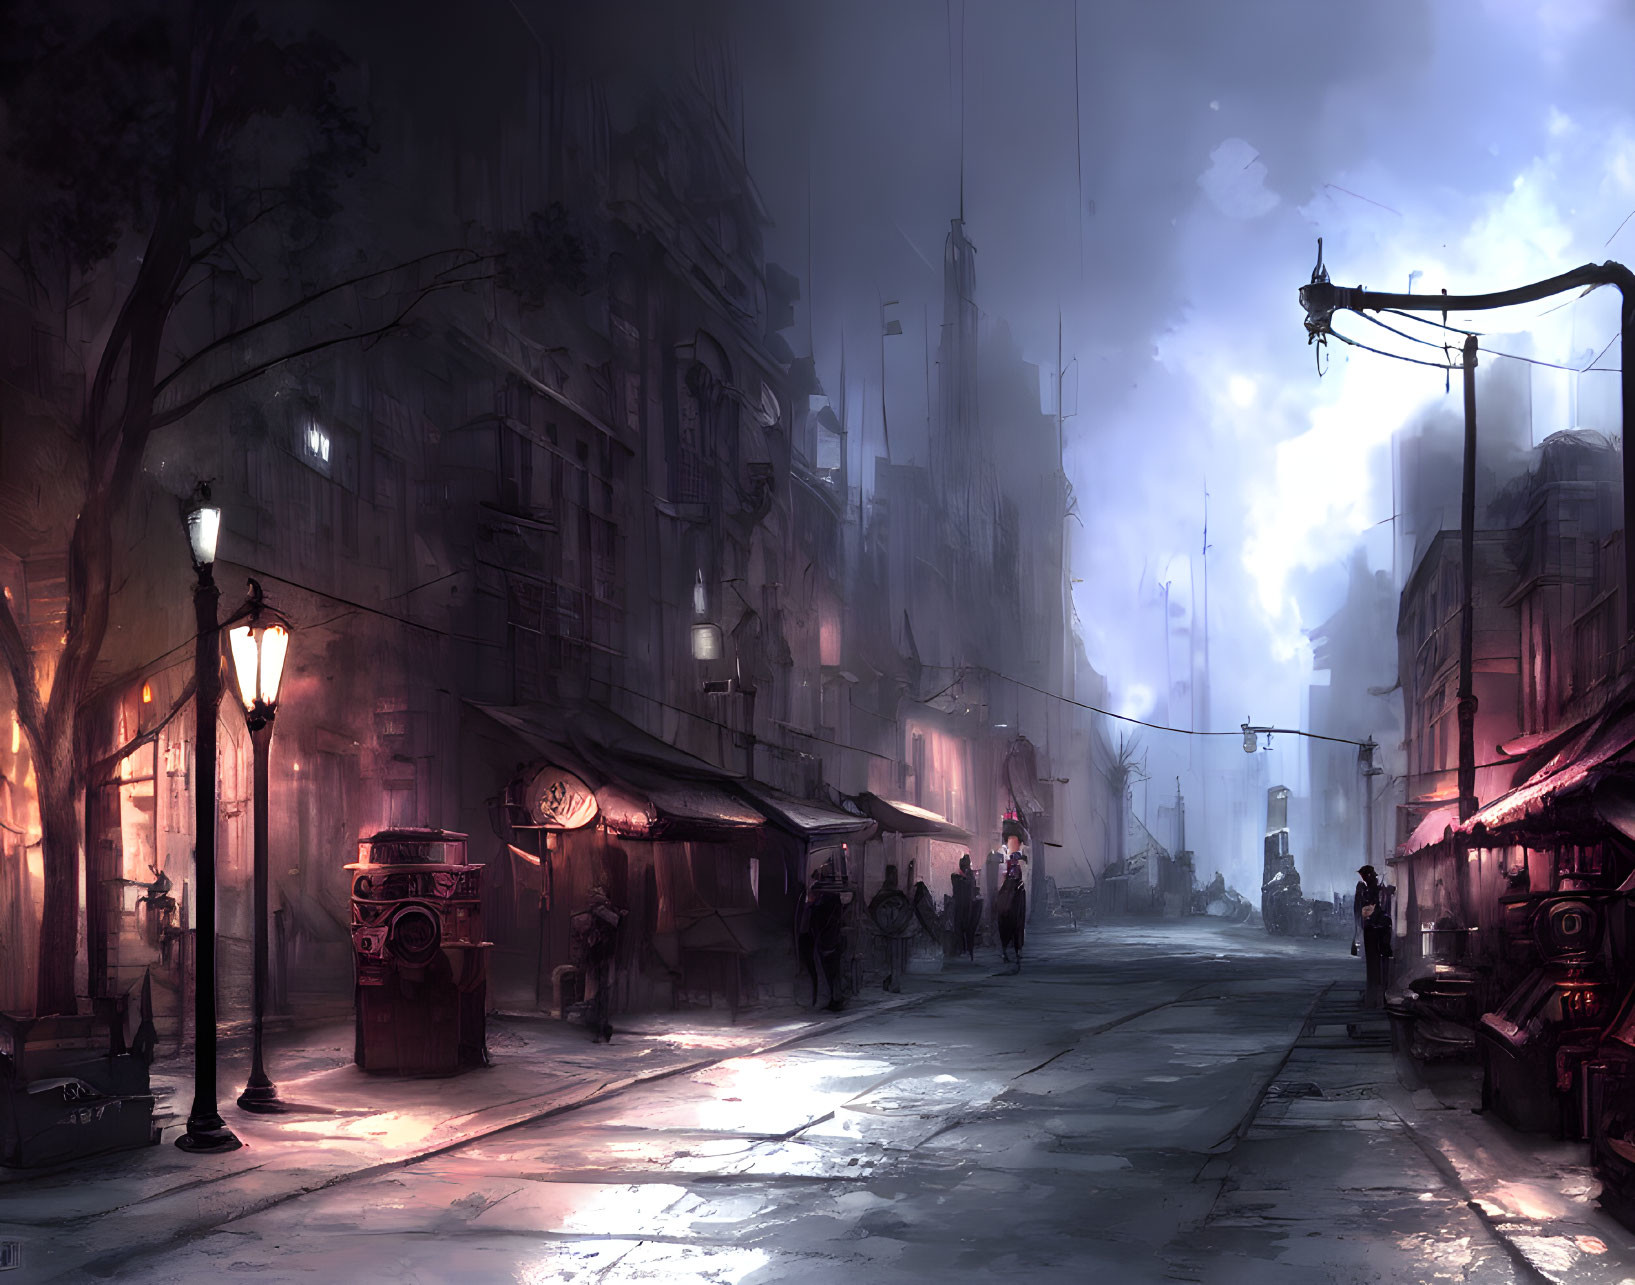 Moody dusk street scene with glowing lamps & silhouetted figures